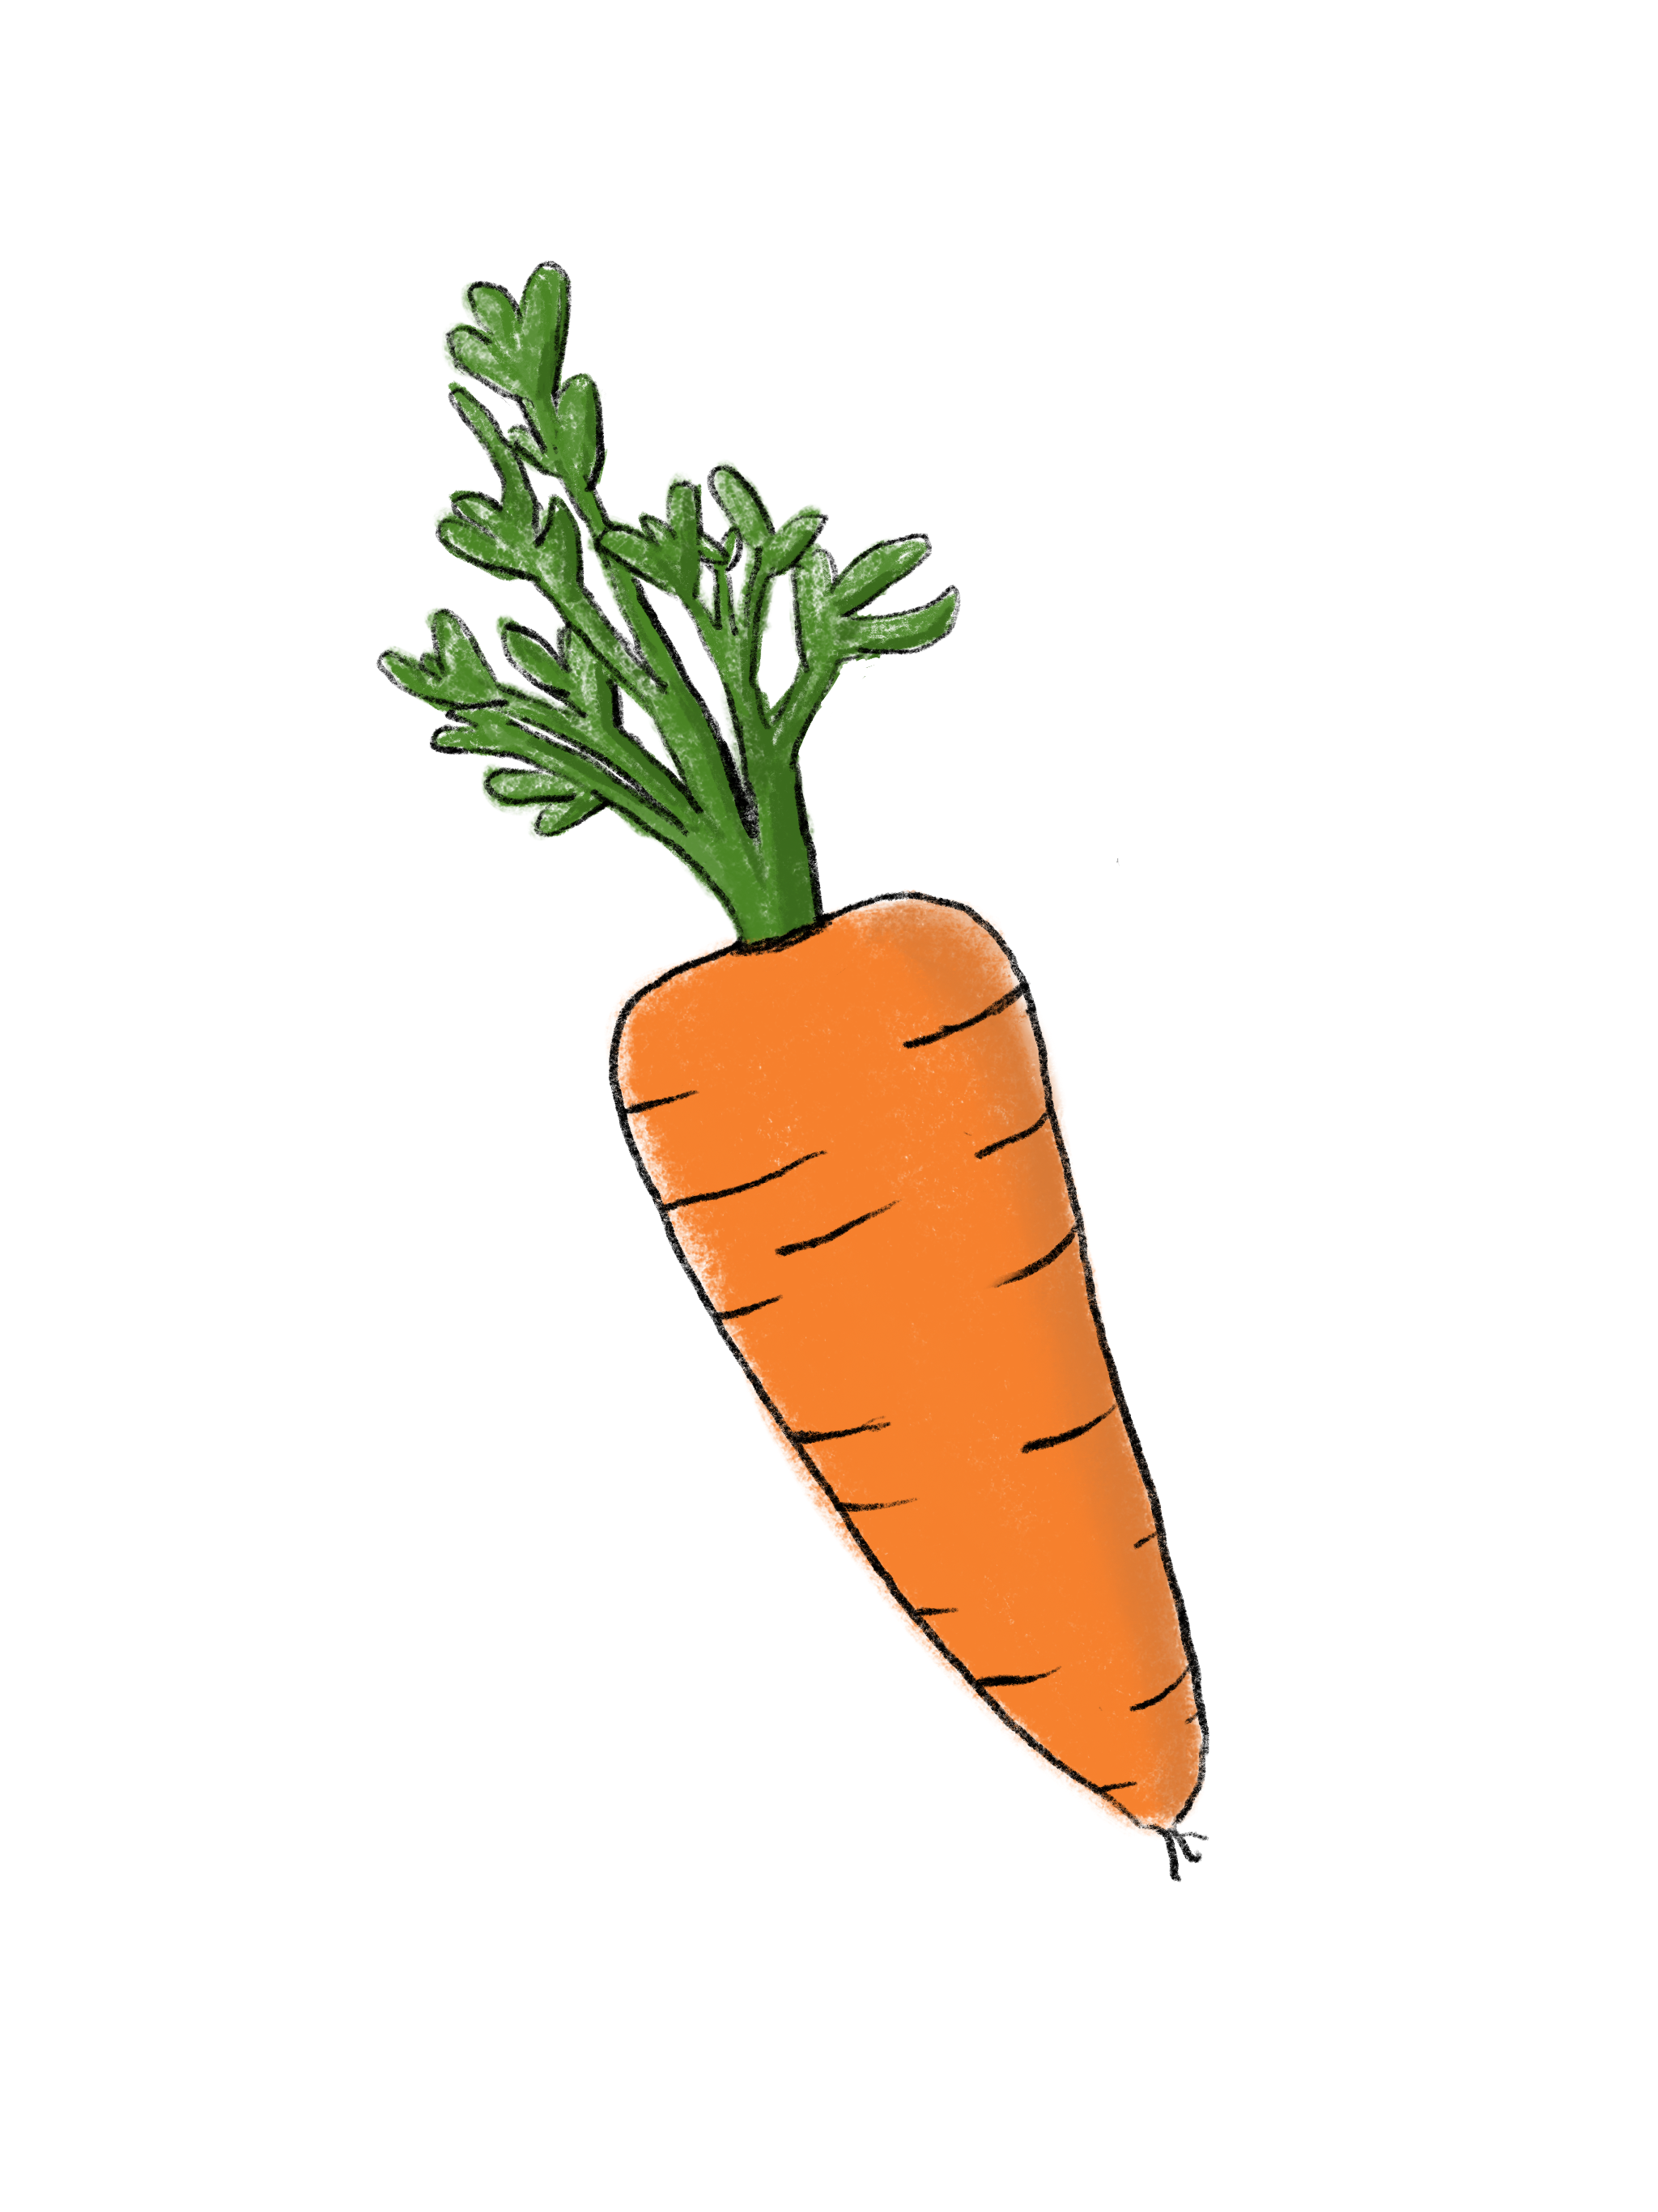 Drawing a Day, Day 4 CARROT